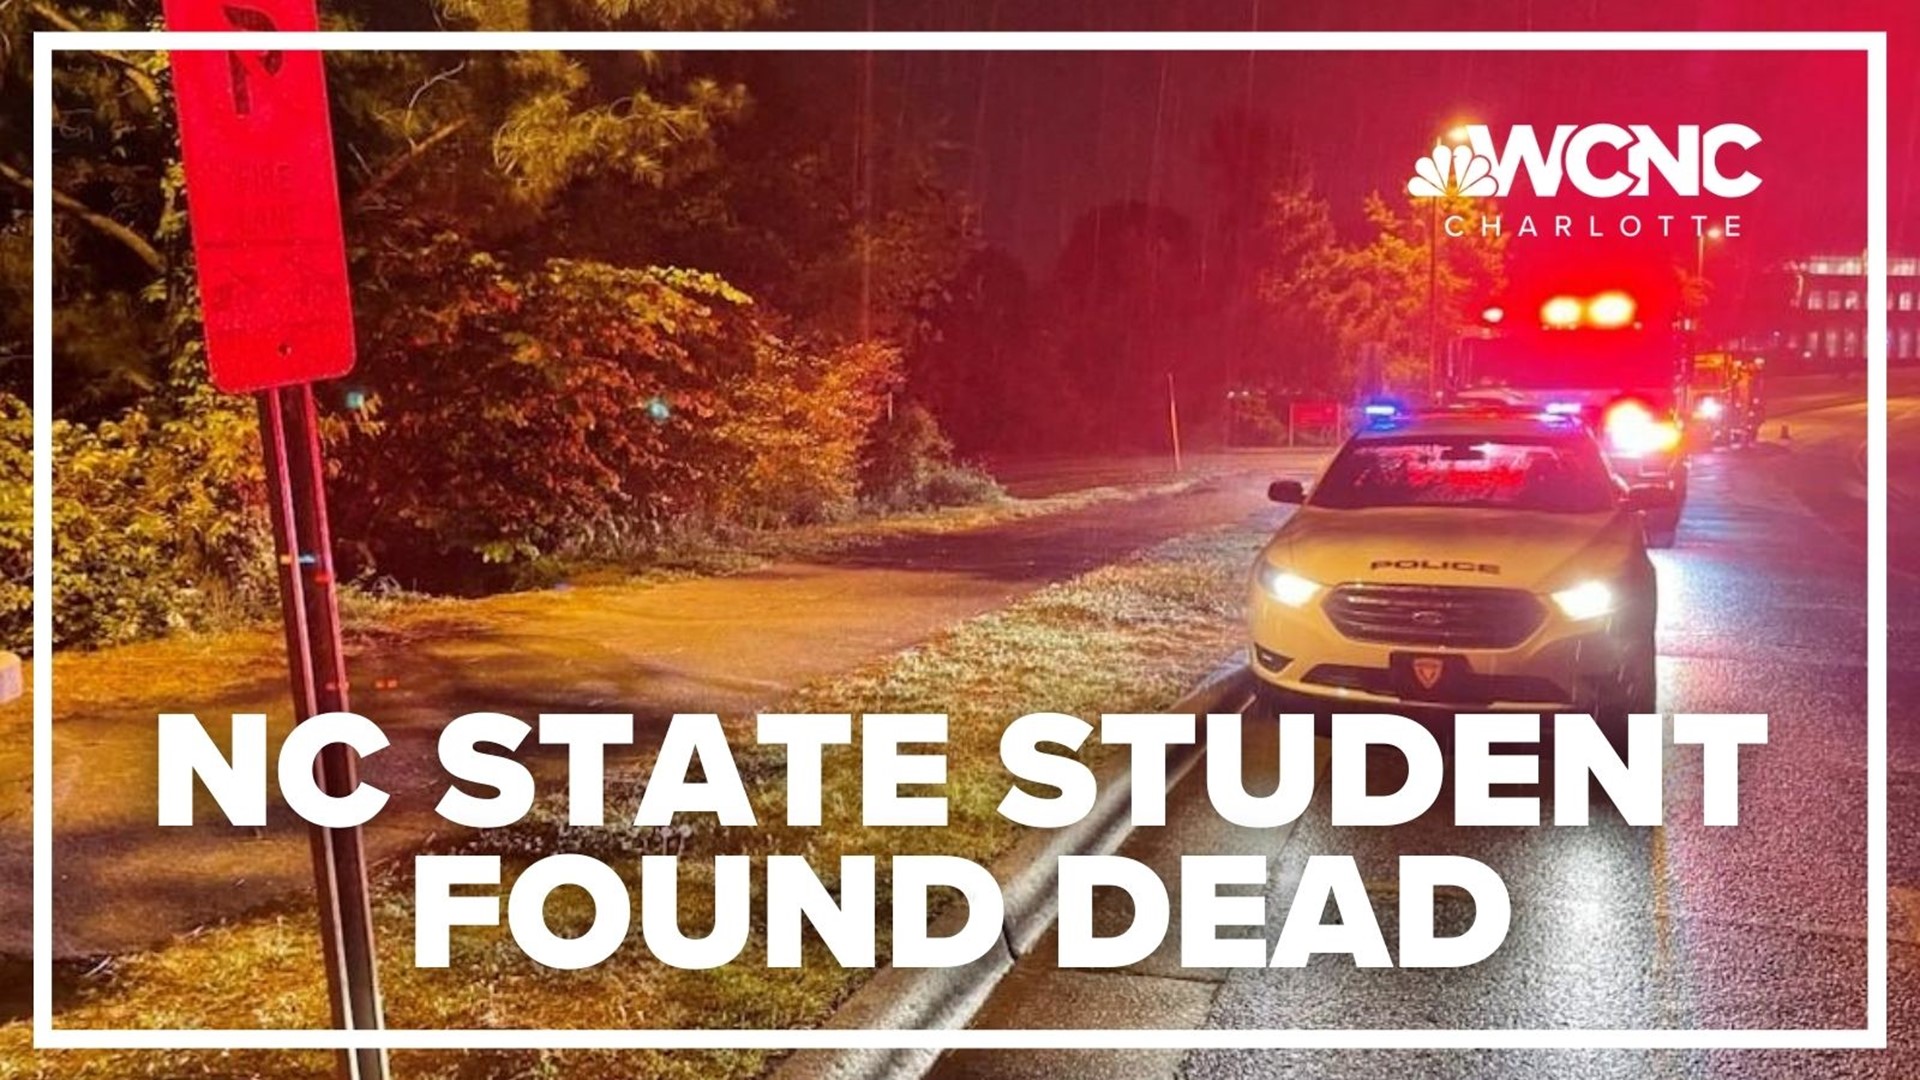 NC State student found dead near Lake Raleigh apparent suicide